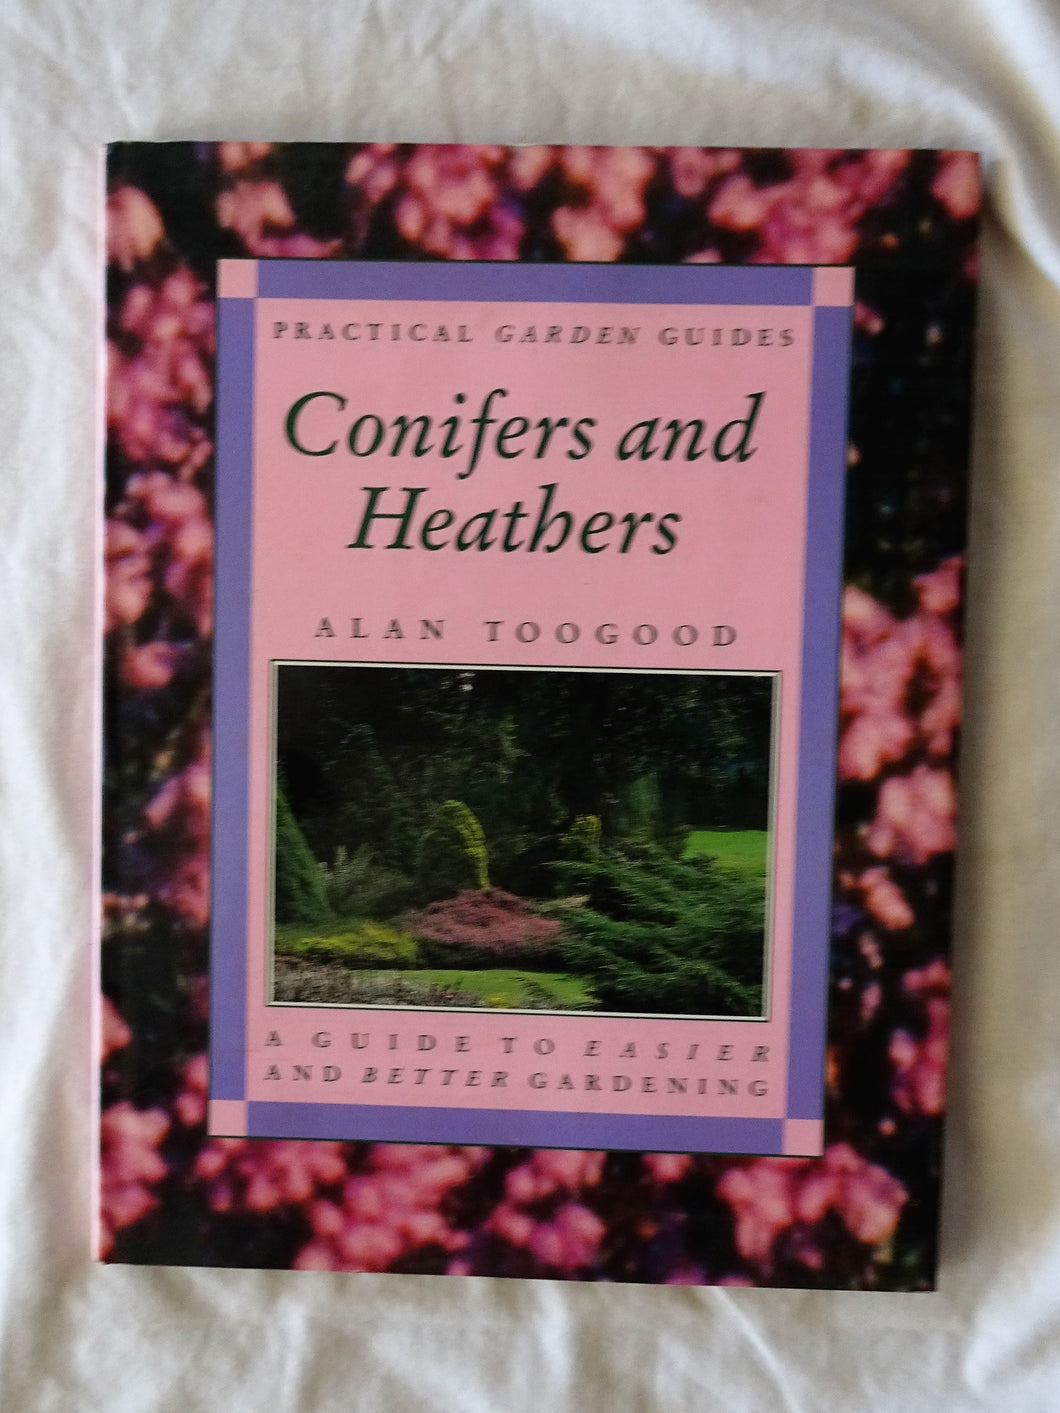 Conifers and Heathers by Alan Toogood